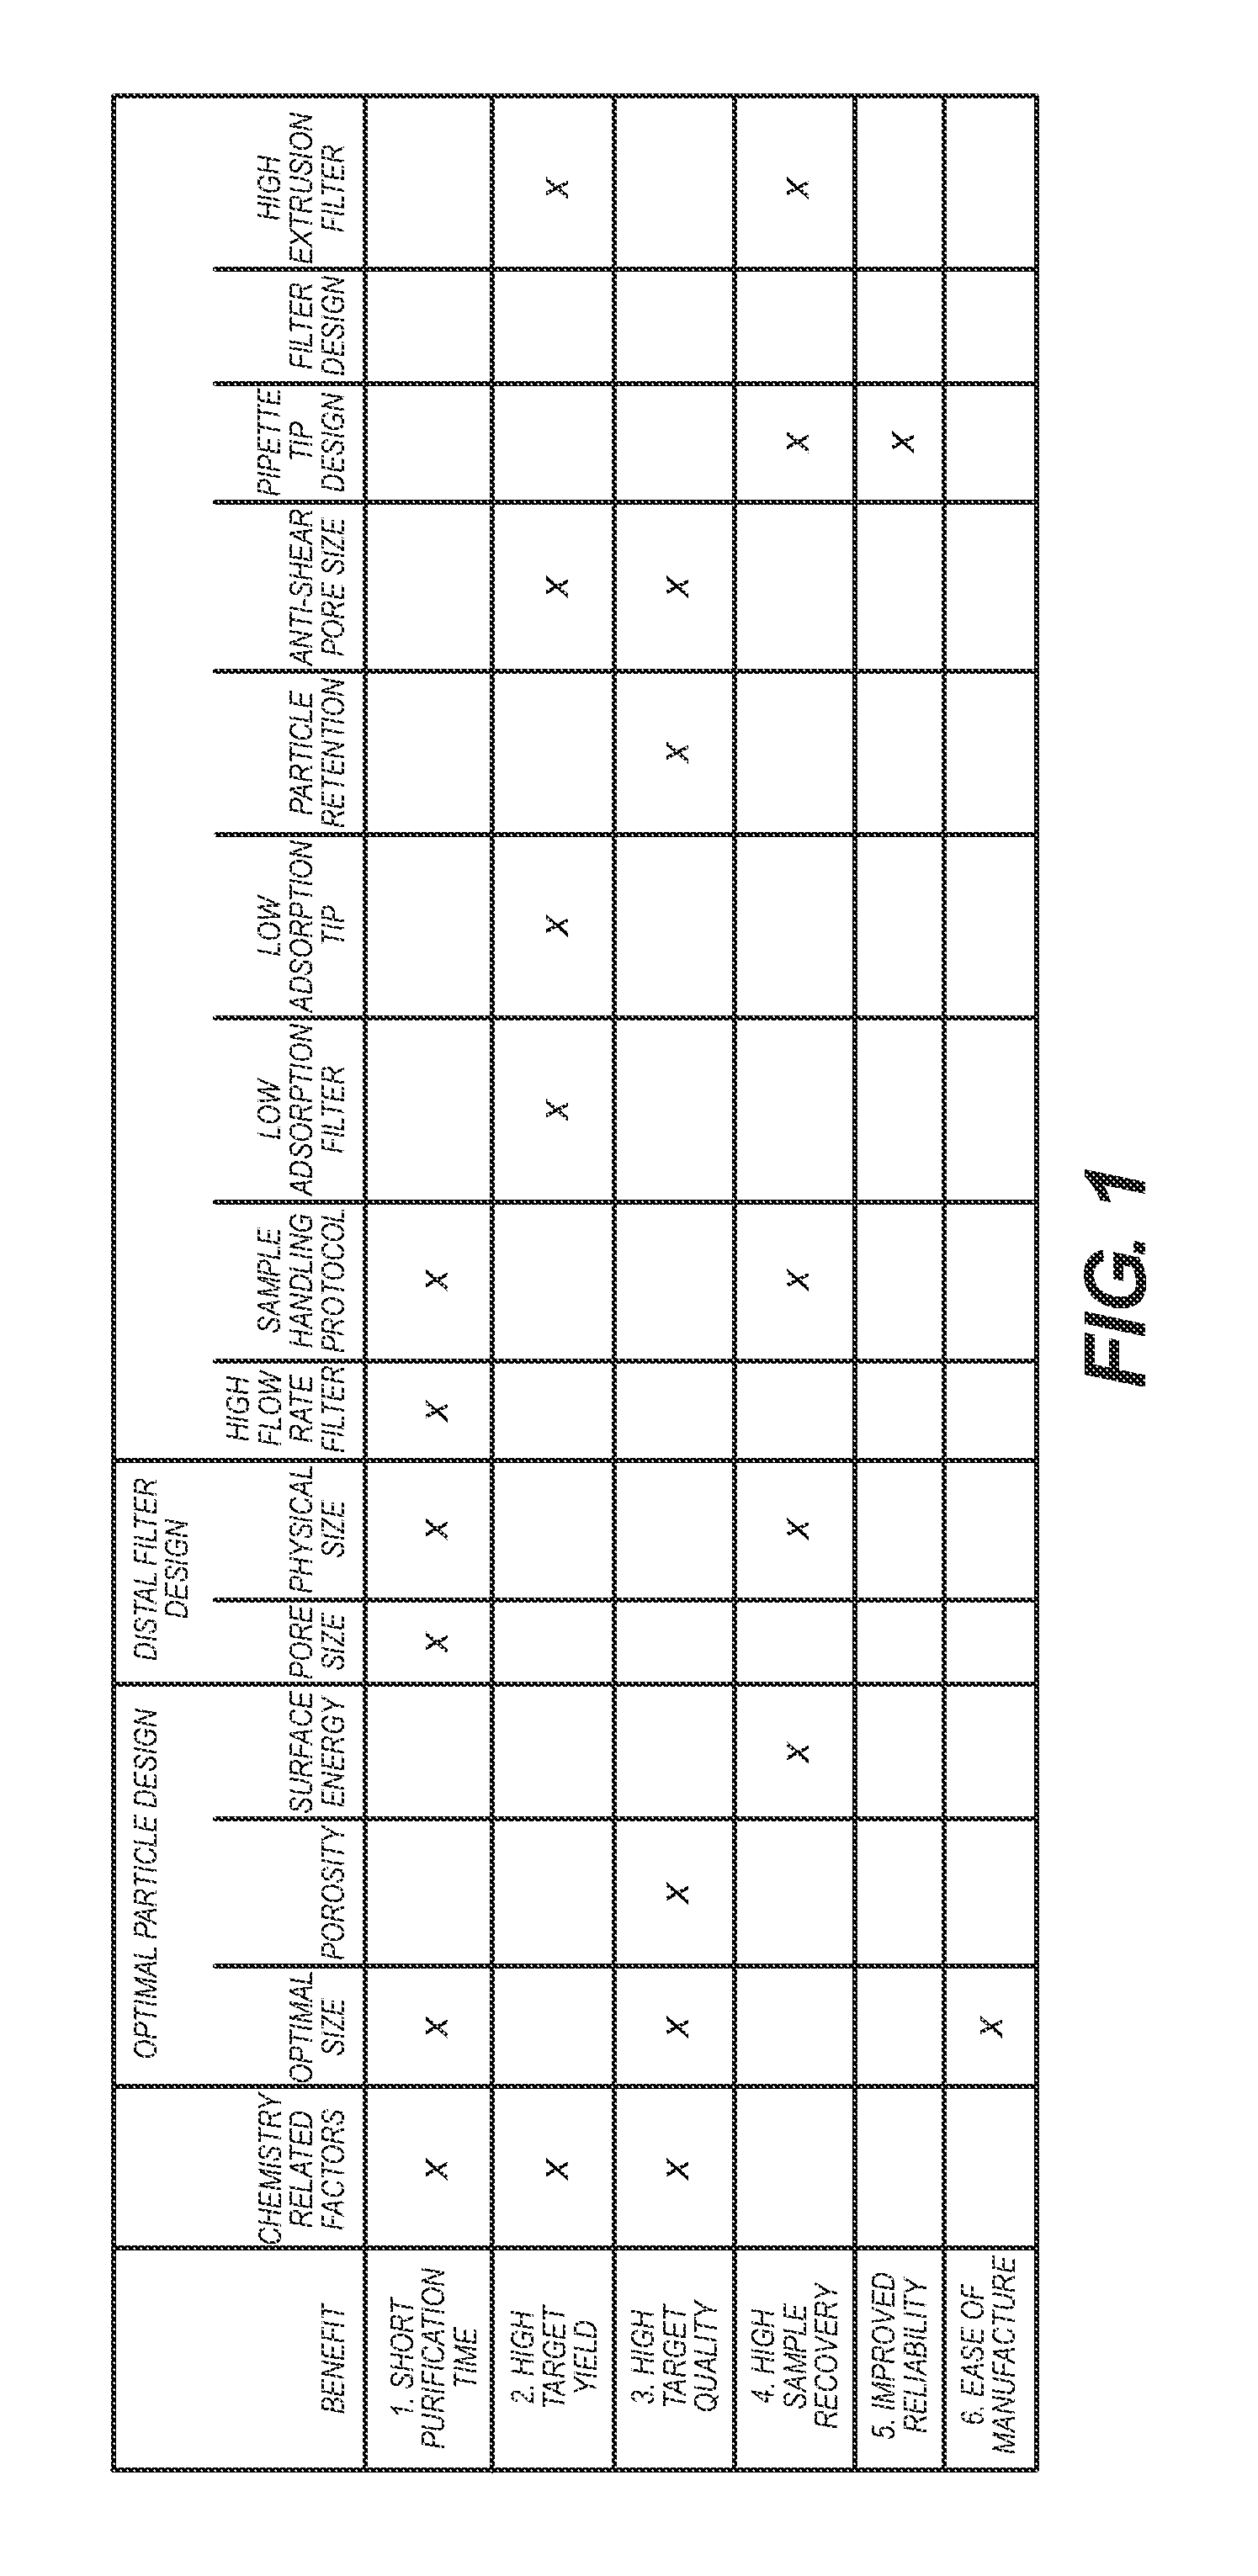 System and methods for purifying biological materials